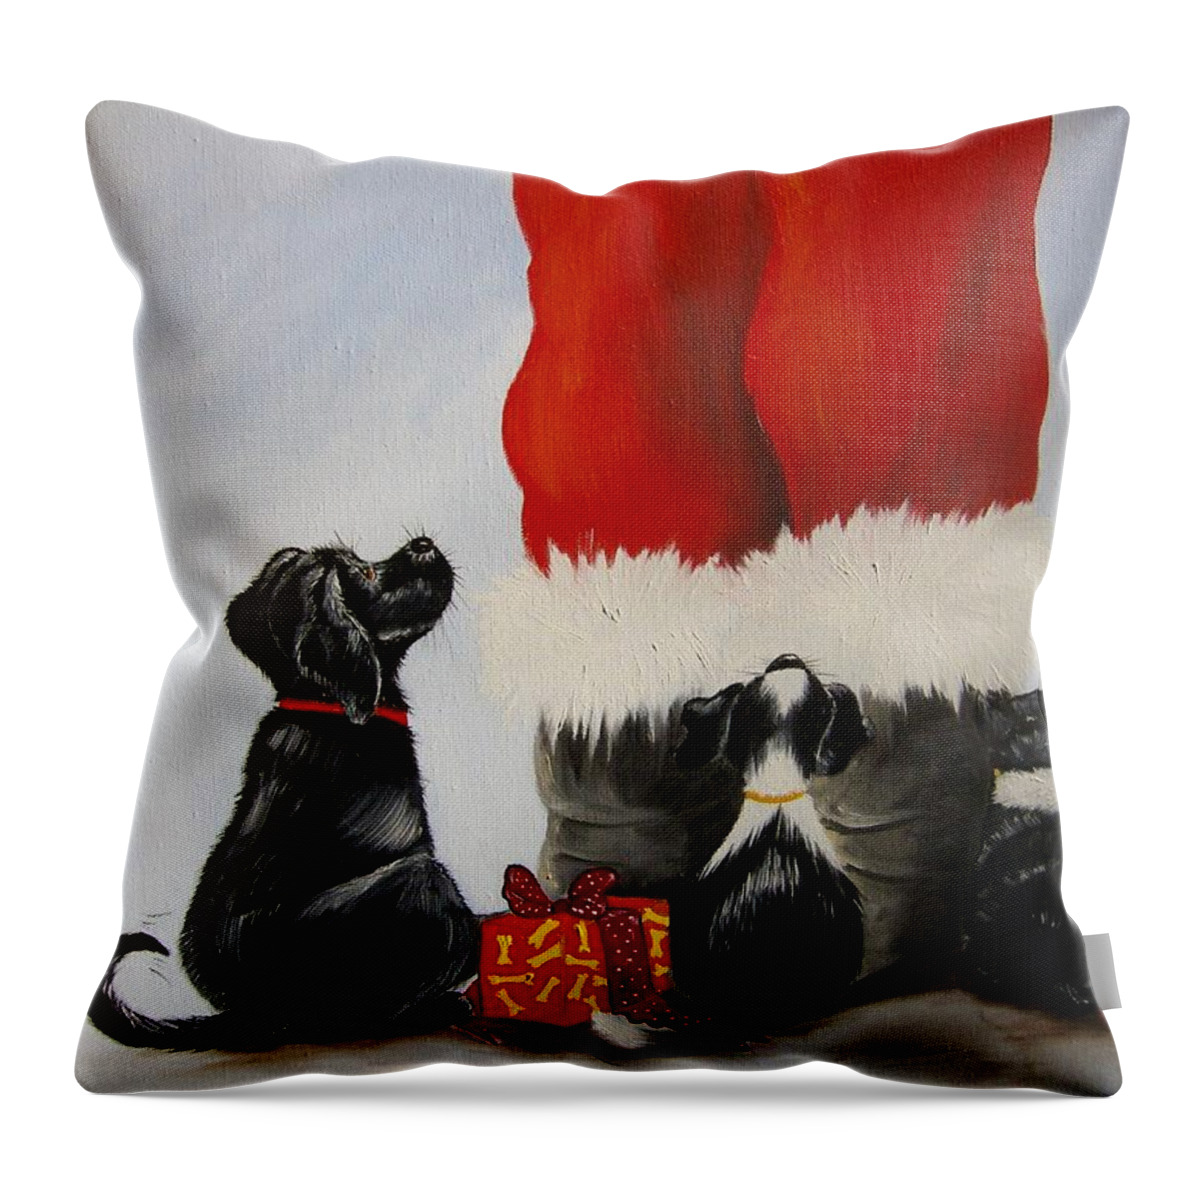 Santa Throw Pillow featuring the painting All the Fur Kids Love Santa by Debra Campbell